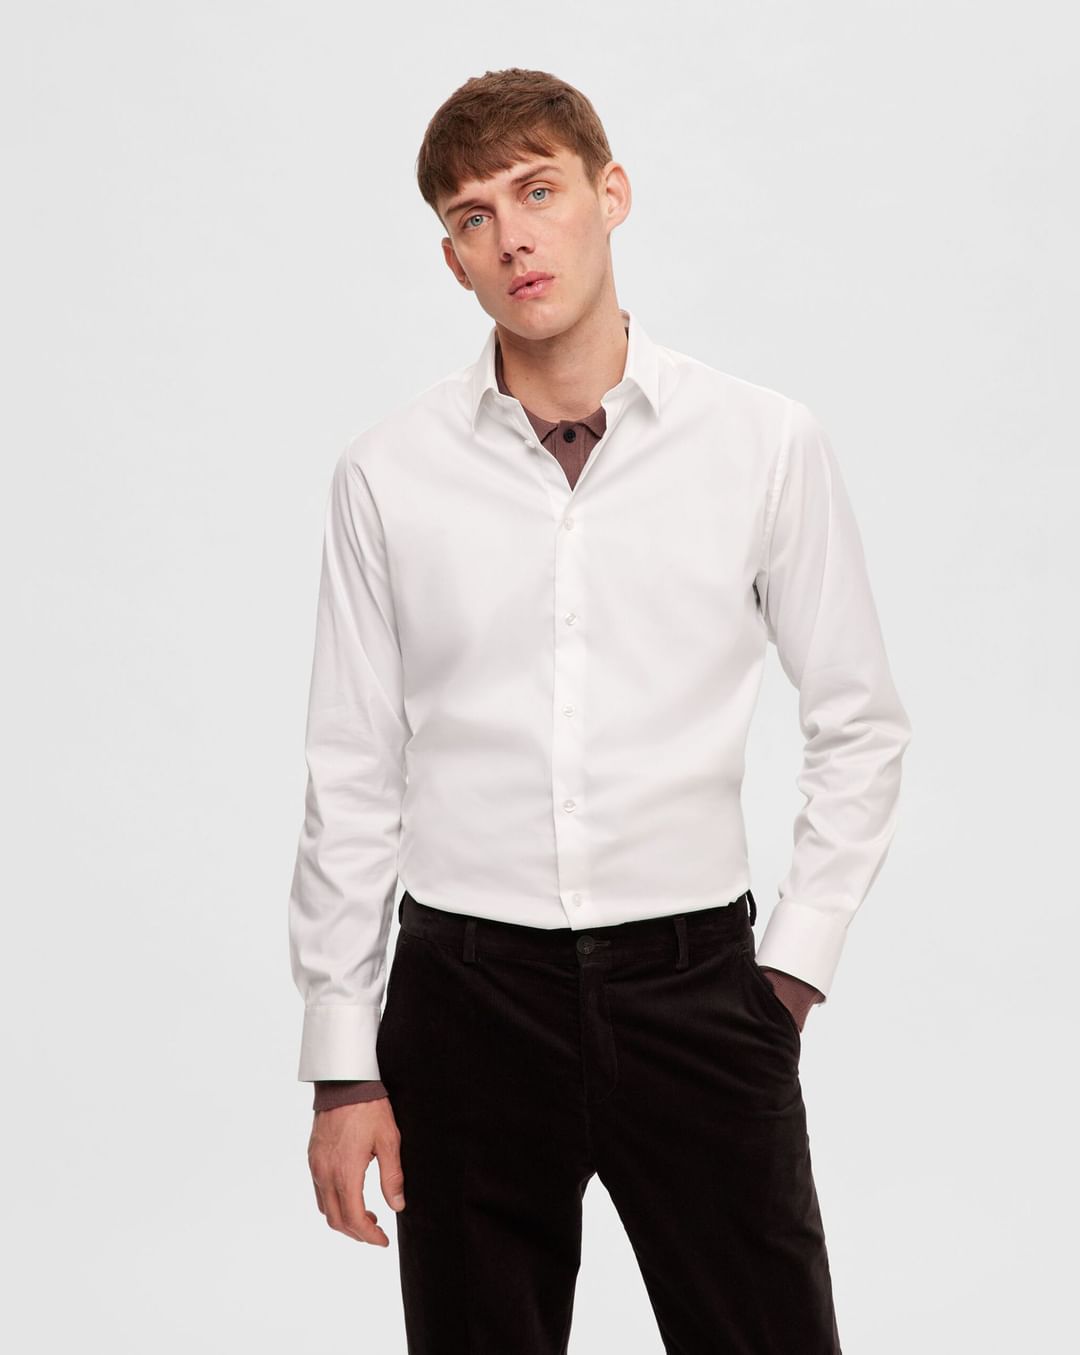 Online for Men White Selected | 408016 Homme Full at Shirts Buy Sleeves